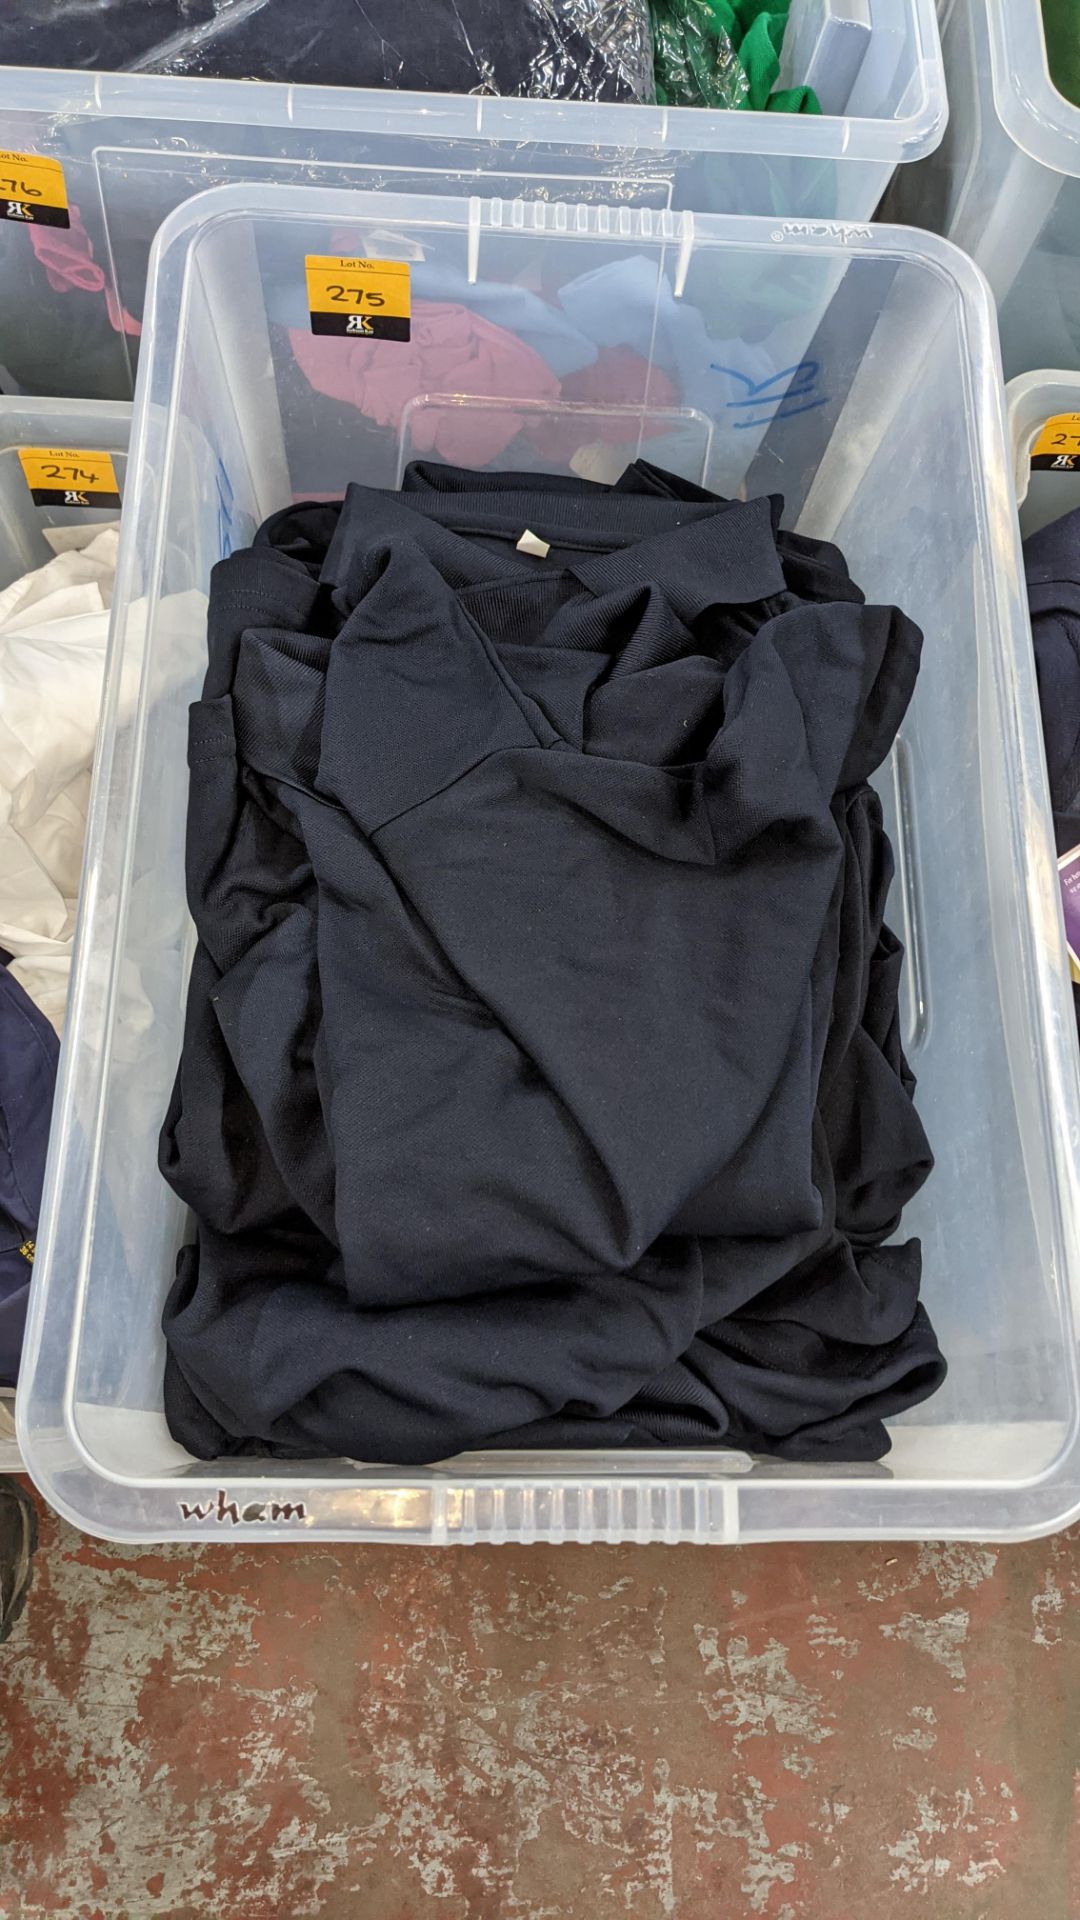 Approx 40 off blue polo shirts - the contents of 1 large crate. NB crate excluded - Image 2 of 4